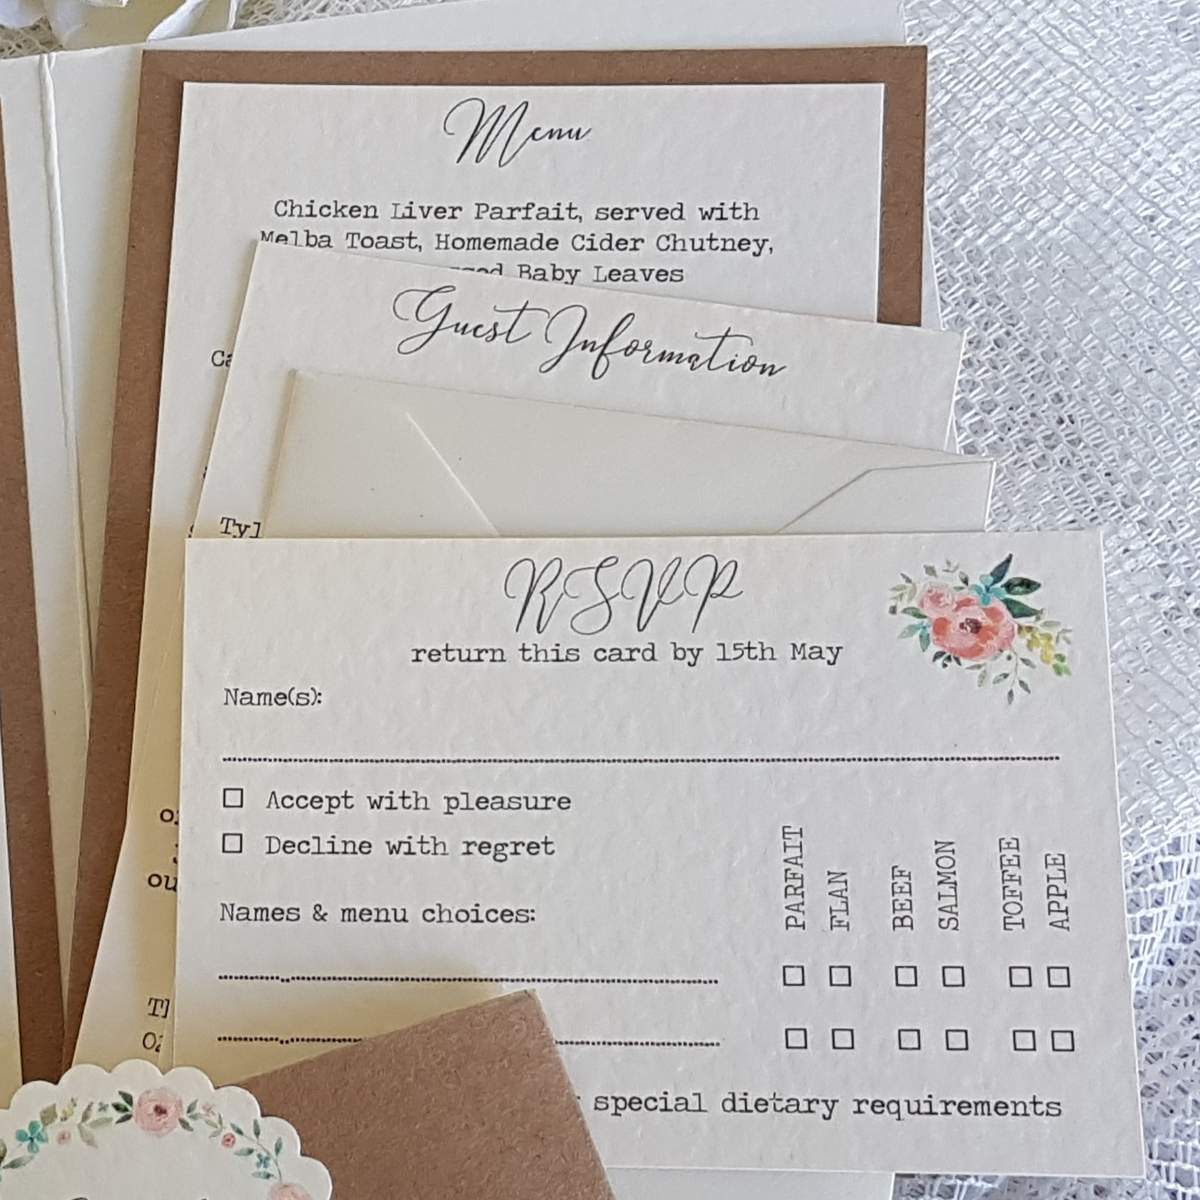 a rustic wedding invitation with extra information and a reply card with menu choices